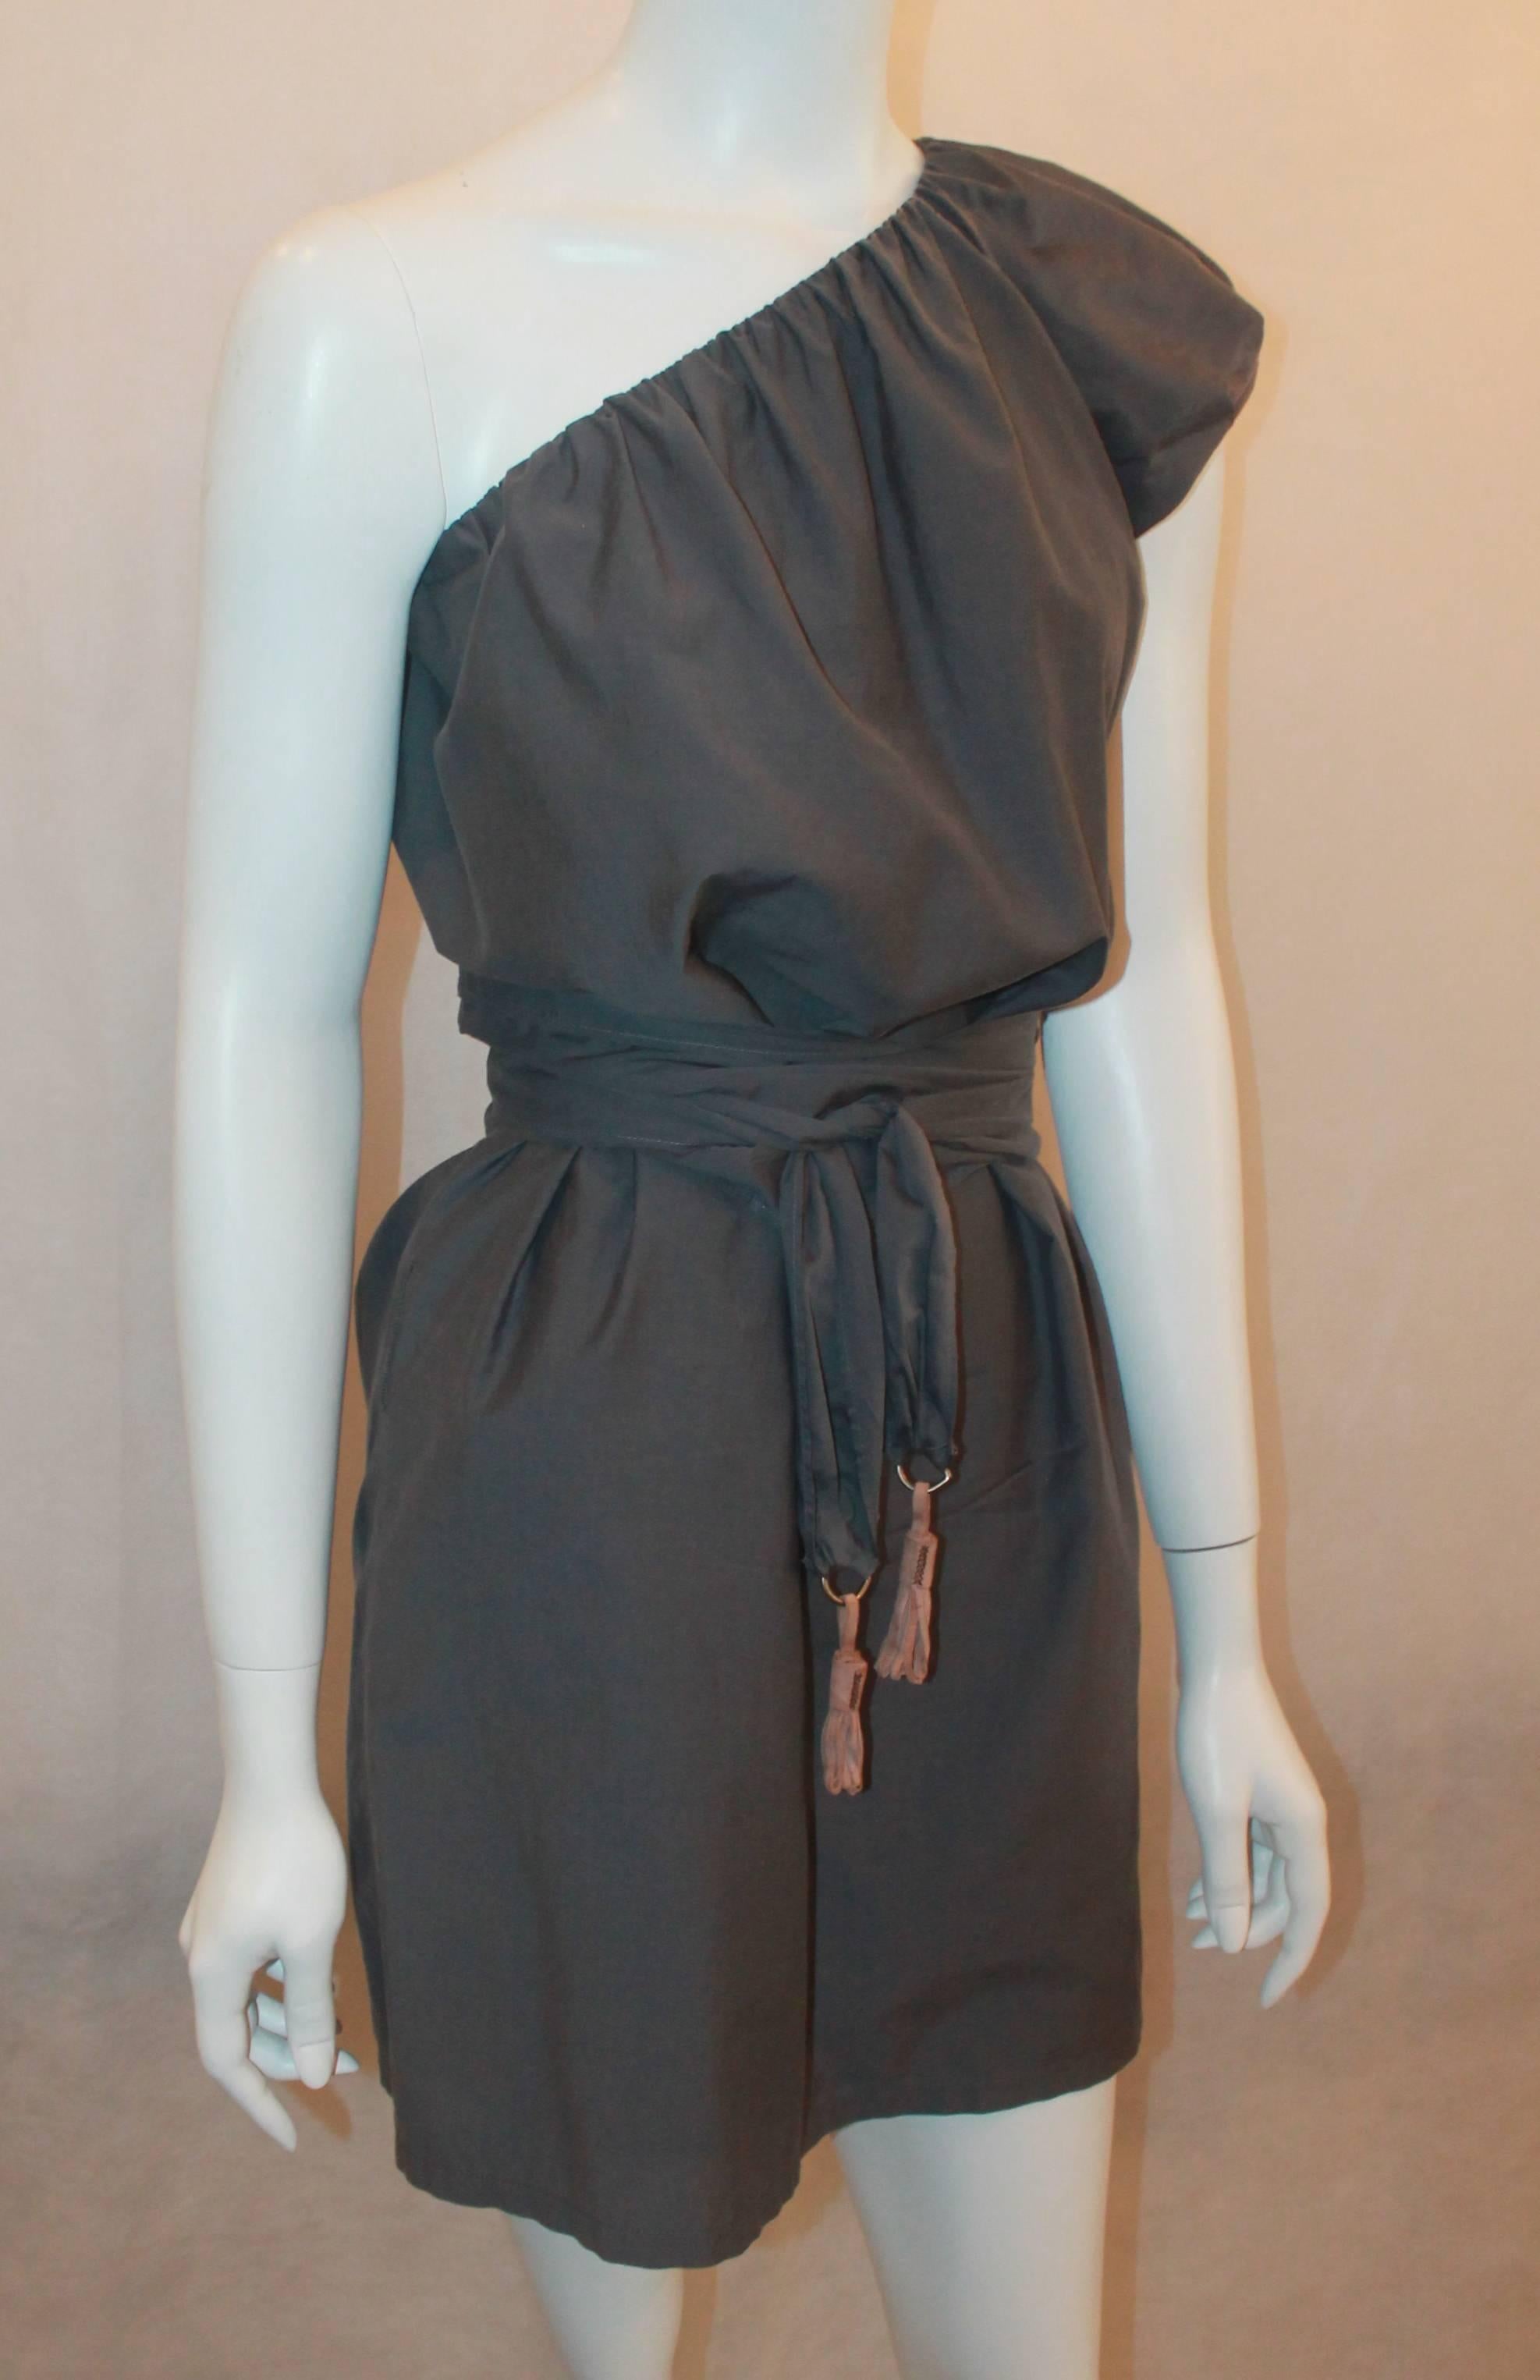 Brunello Cucinelli Grey Cotton One Shoulder Shift Dress with Belt - S. This short dress is in excellent condition and is great for the warm weather. It features elastic at the neck area, pockets on both sides, and a bely that has hanging leather